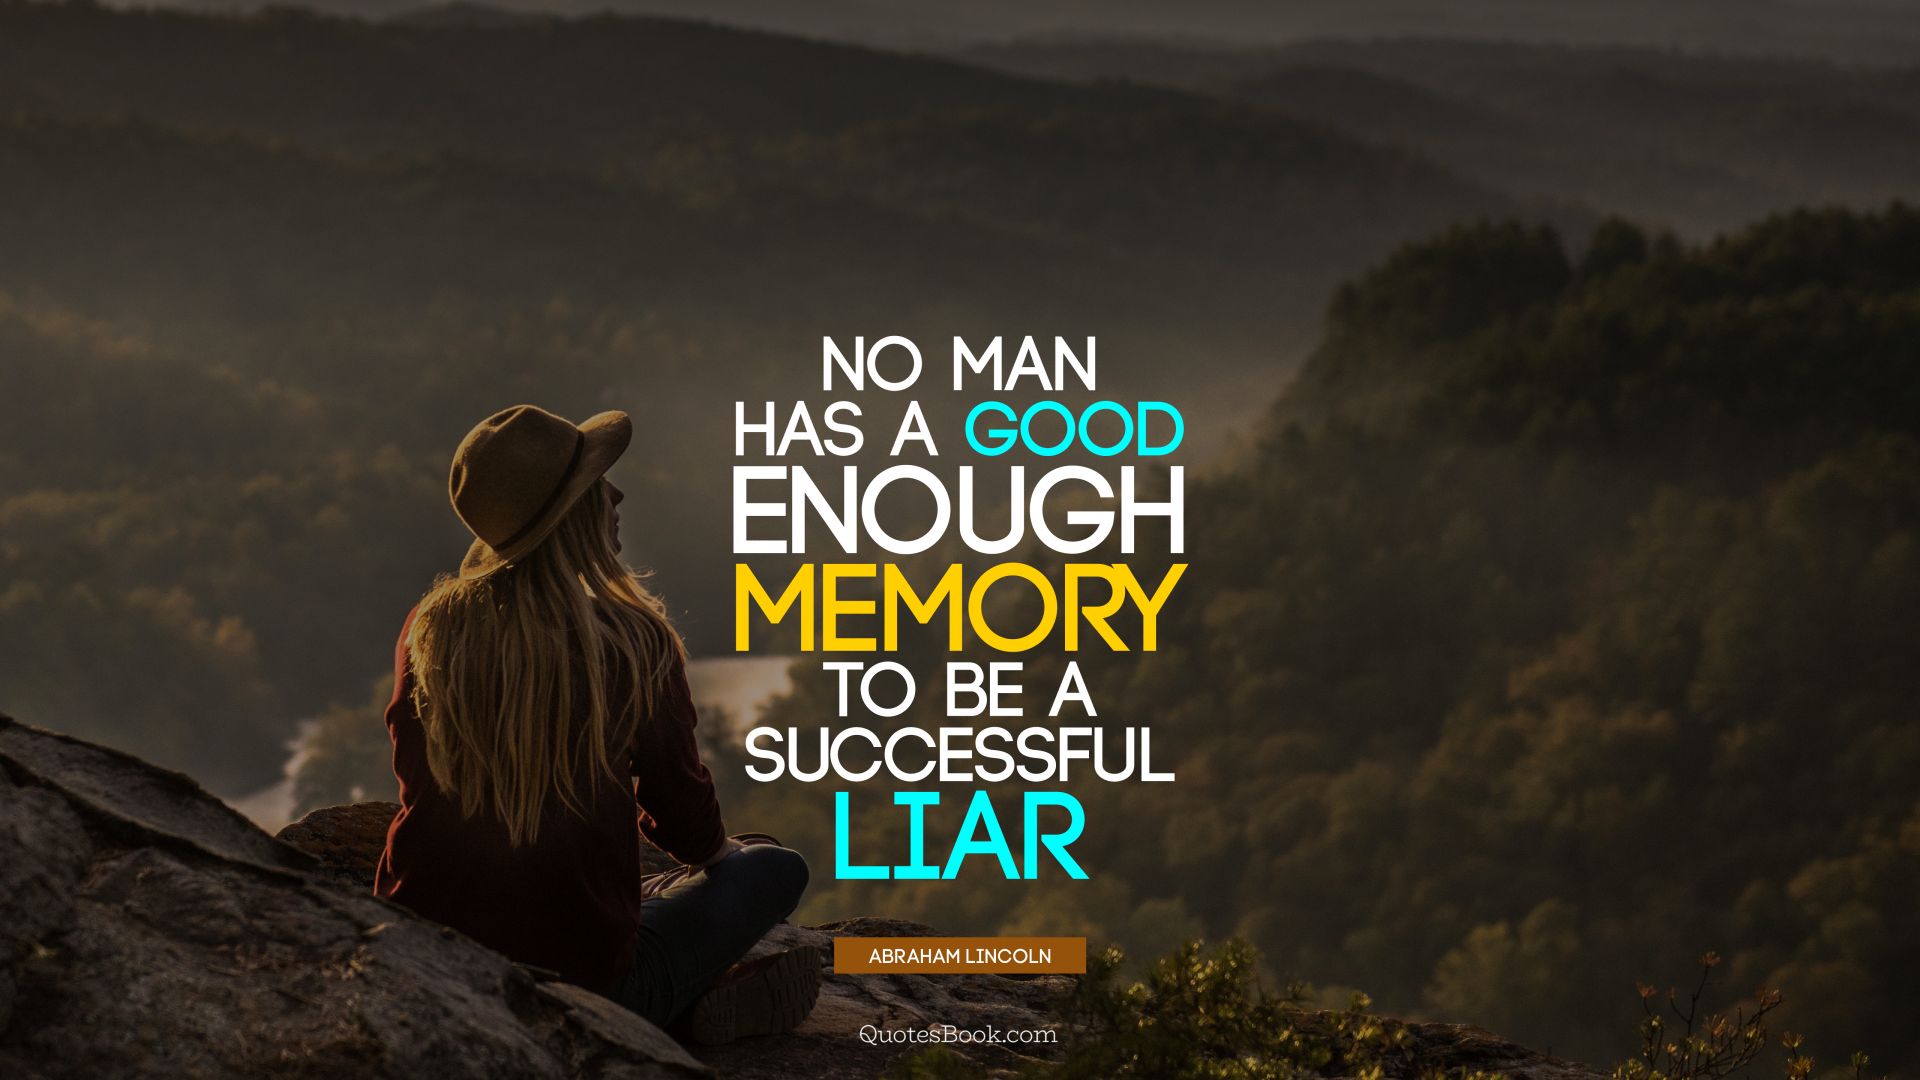 No man has a good enough memory to be a successful liar. - Quote by Abraham Lincoln